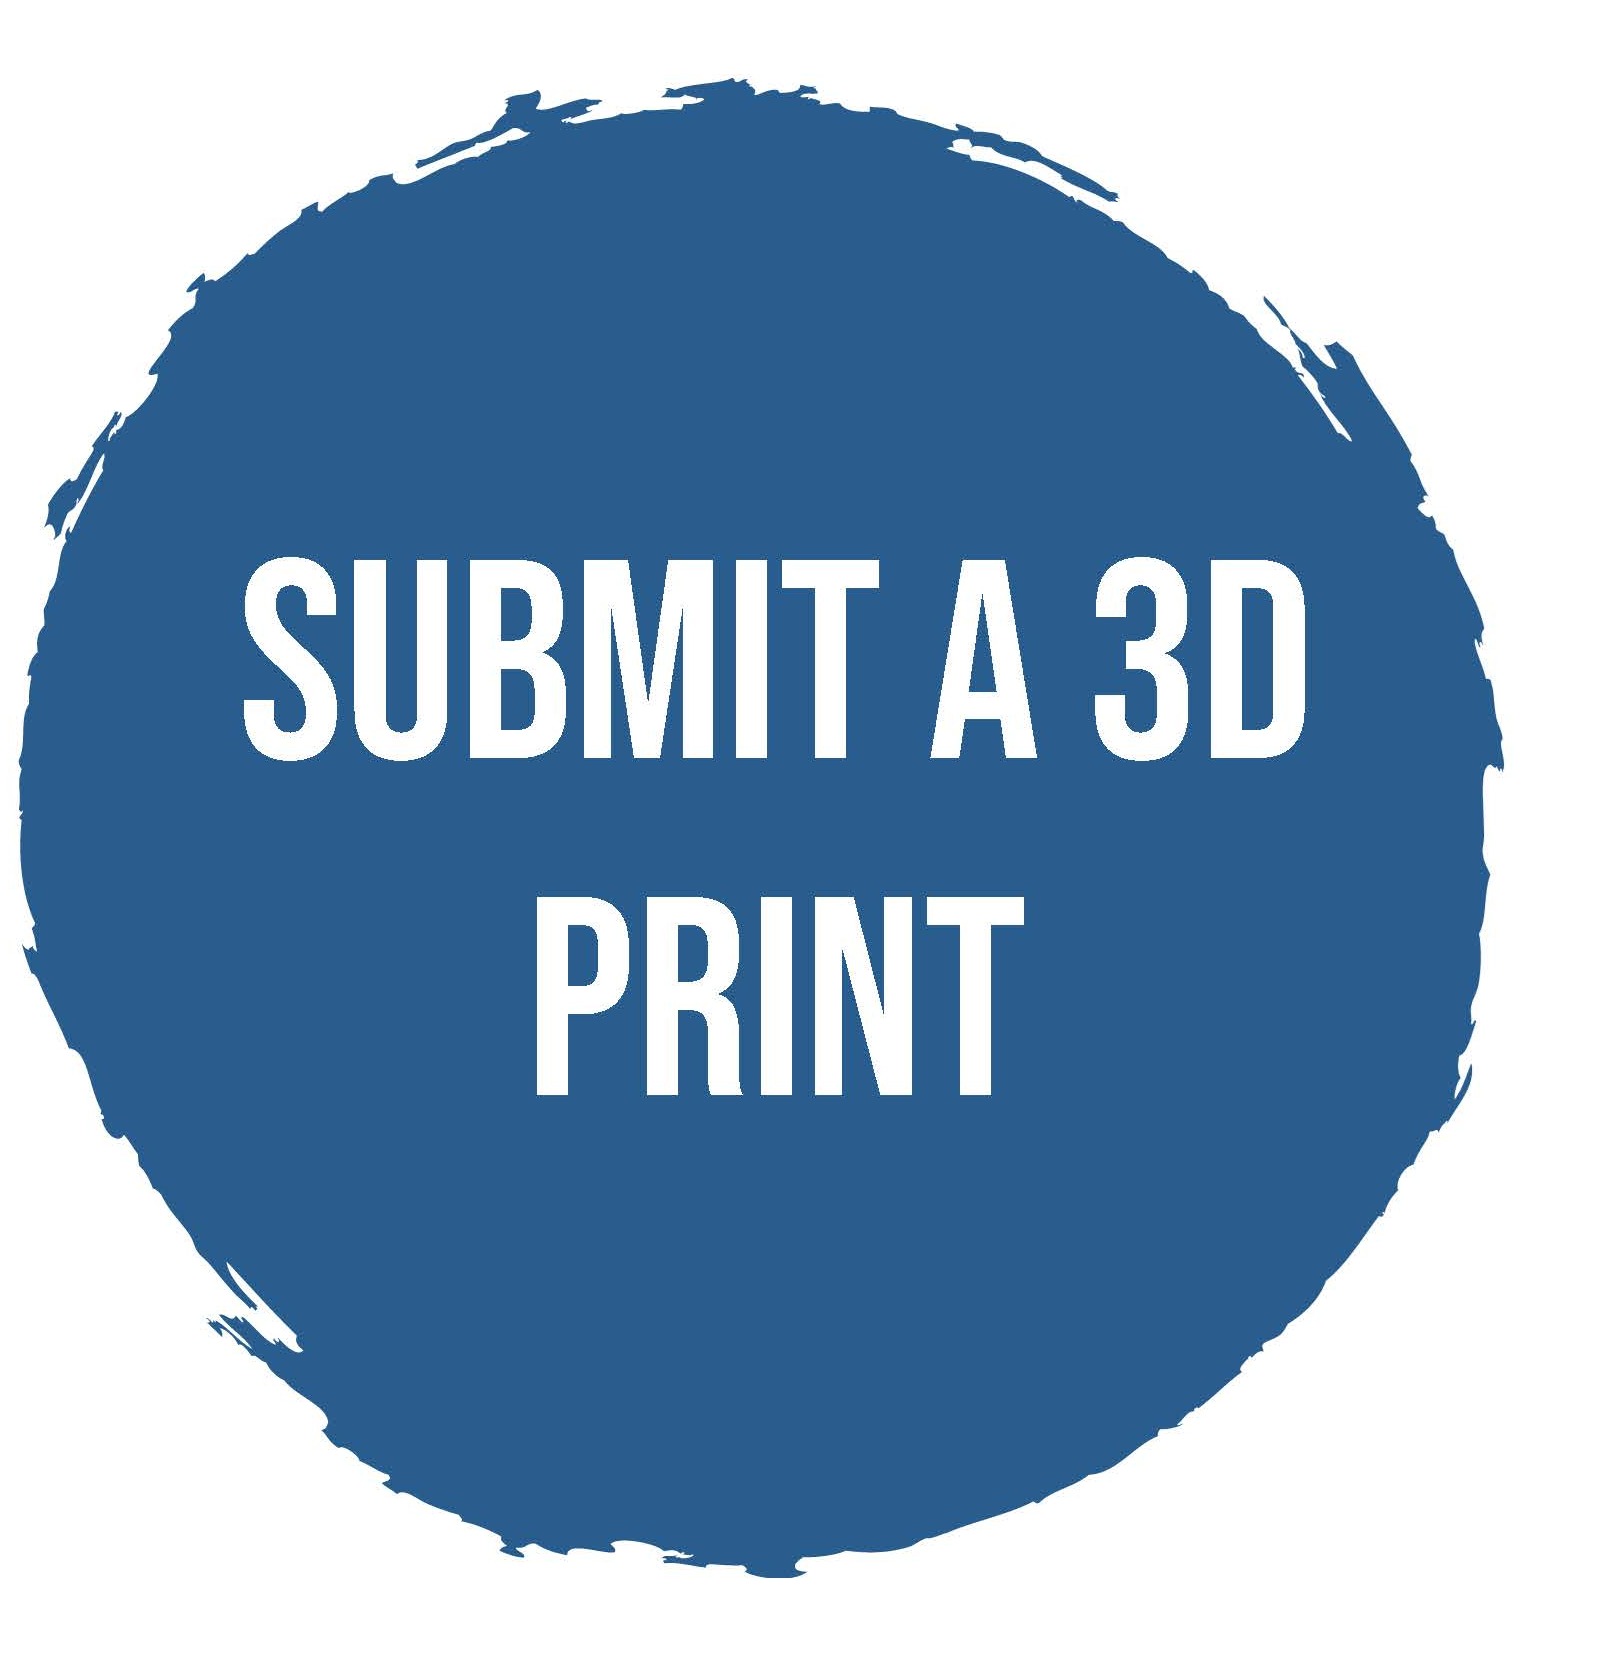 Click to submit a 3D print file